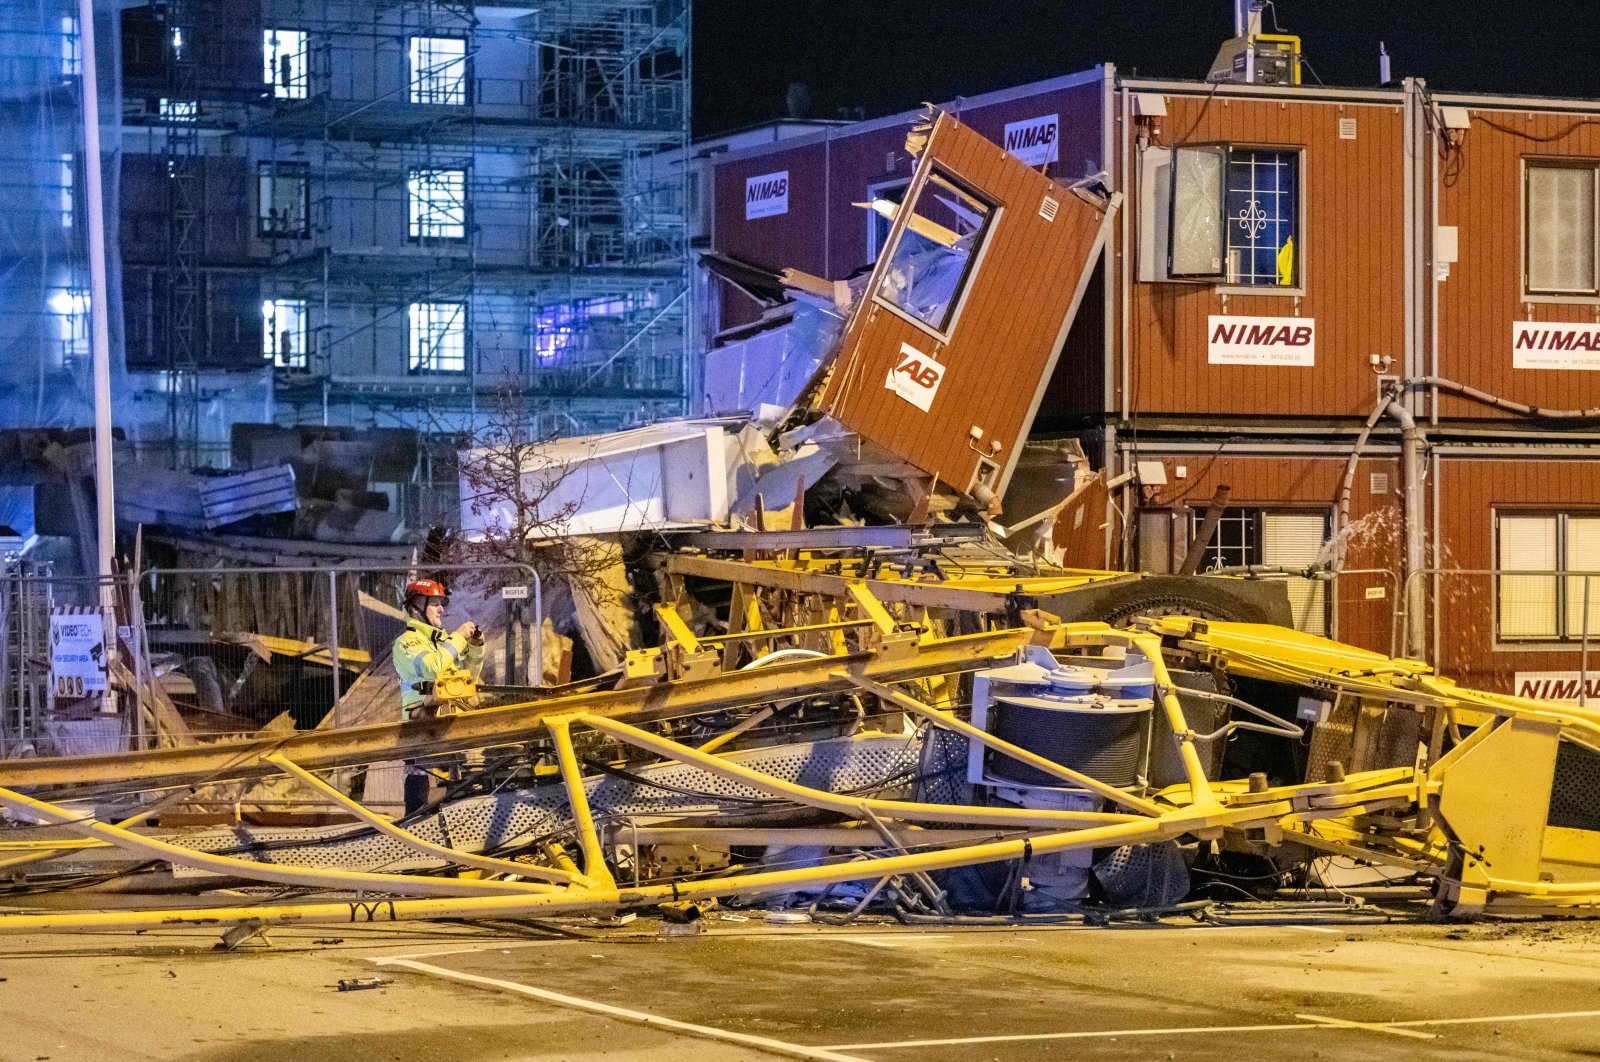 An overturned crane has crushed several construction sheds in central Malmo when storm Malik continues to ravage in the Scania area, Sweden, Jan. 30, 2022. (TT NEWS AGENCY via AFP)